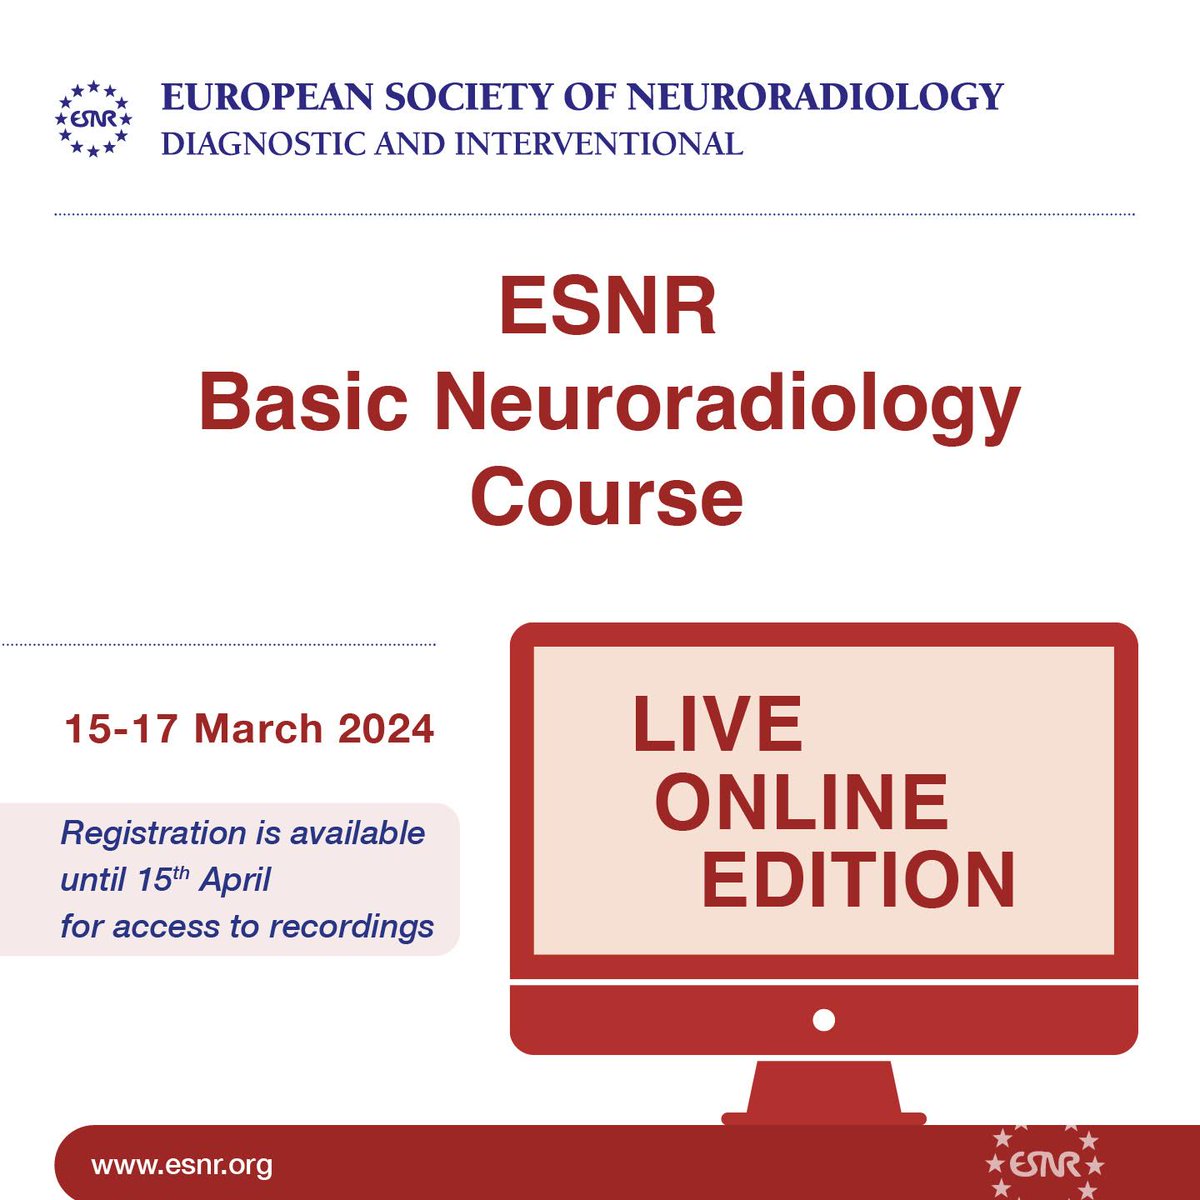 ESNR Basic Neuroradiology Course. The live course is completed but you can still register until 15th April and get access to the recordings of the sessions until 30th April! Info and registration available here: ow.ly/miuV50Q9p1k #Neurorad #RadRes #ThisIsESNR